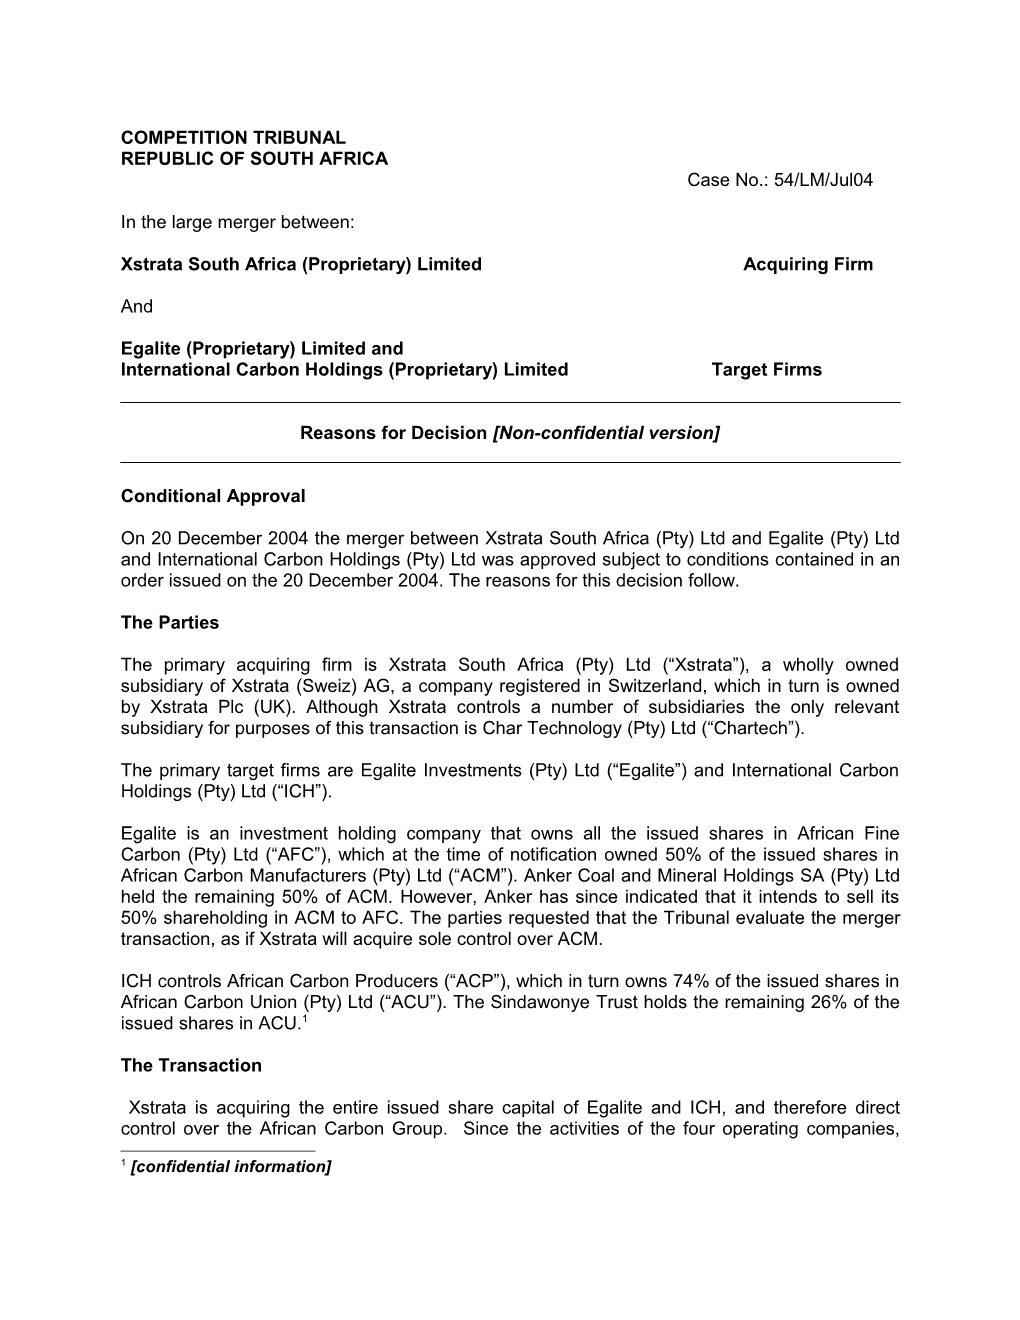 Xstrata South Africa (Proprietary) Limited Acquiring Firm